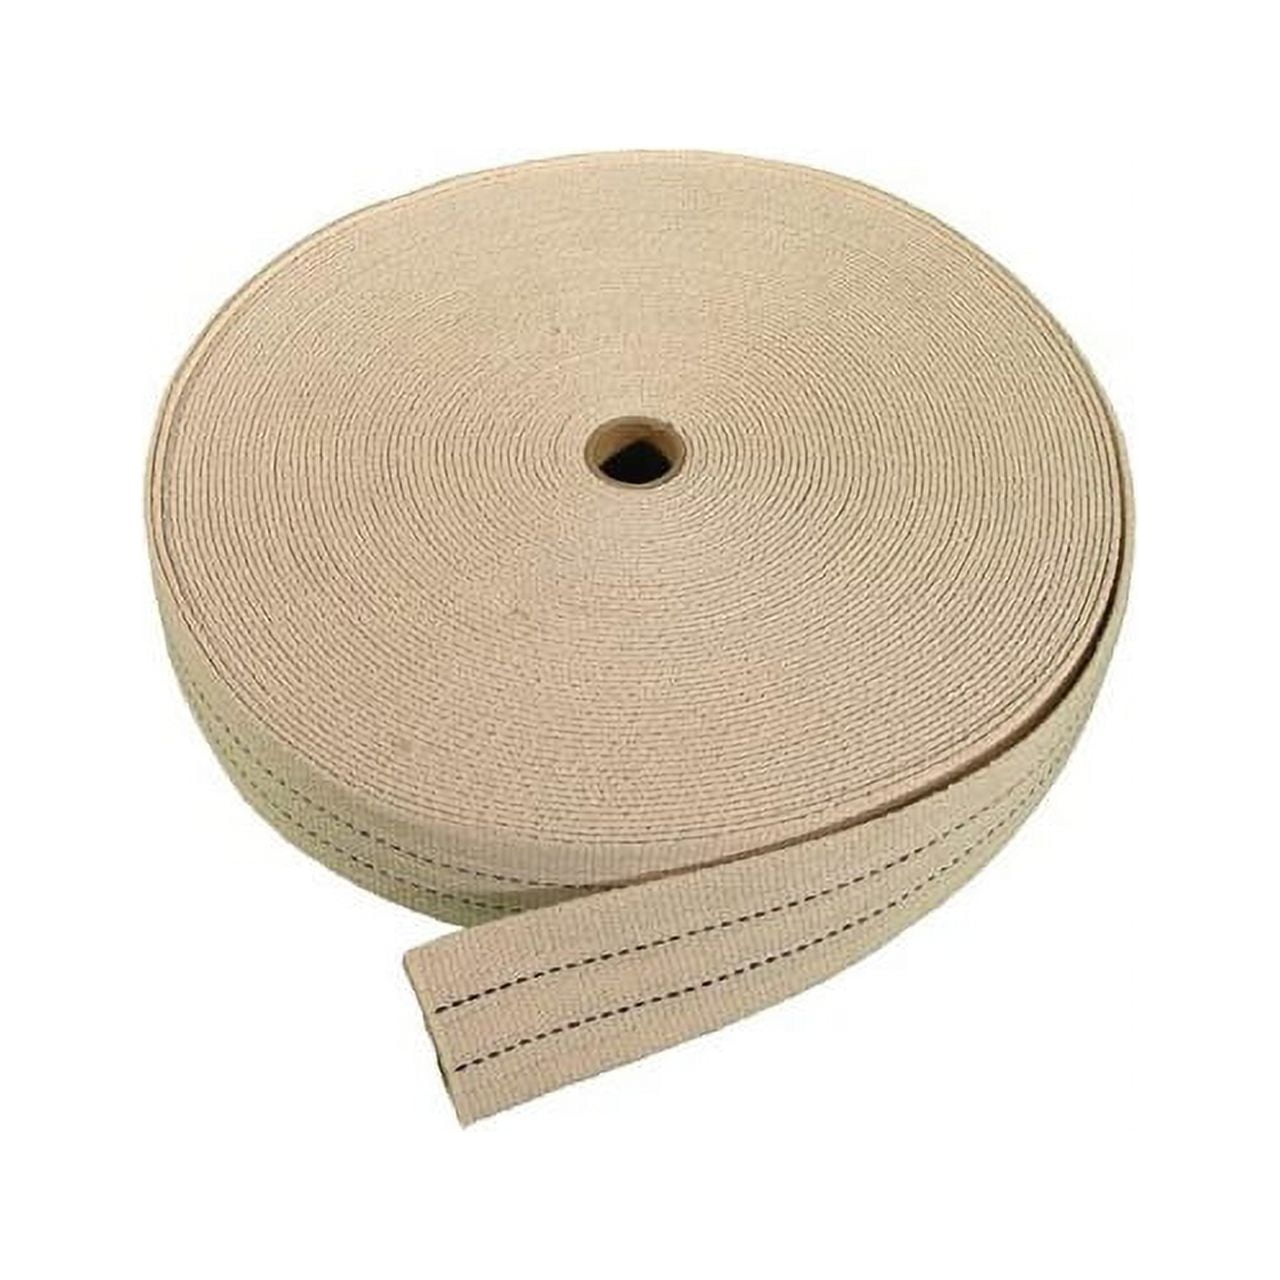 U.S. Solid 5/8 x 0.031 x 3773' Polyester (PET) Strapping Roll, 1014 lbs Break Strength Poly Strapping - UV, Water, and Rust Resistance